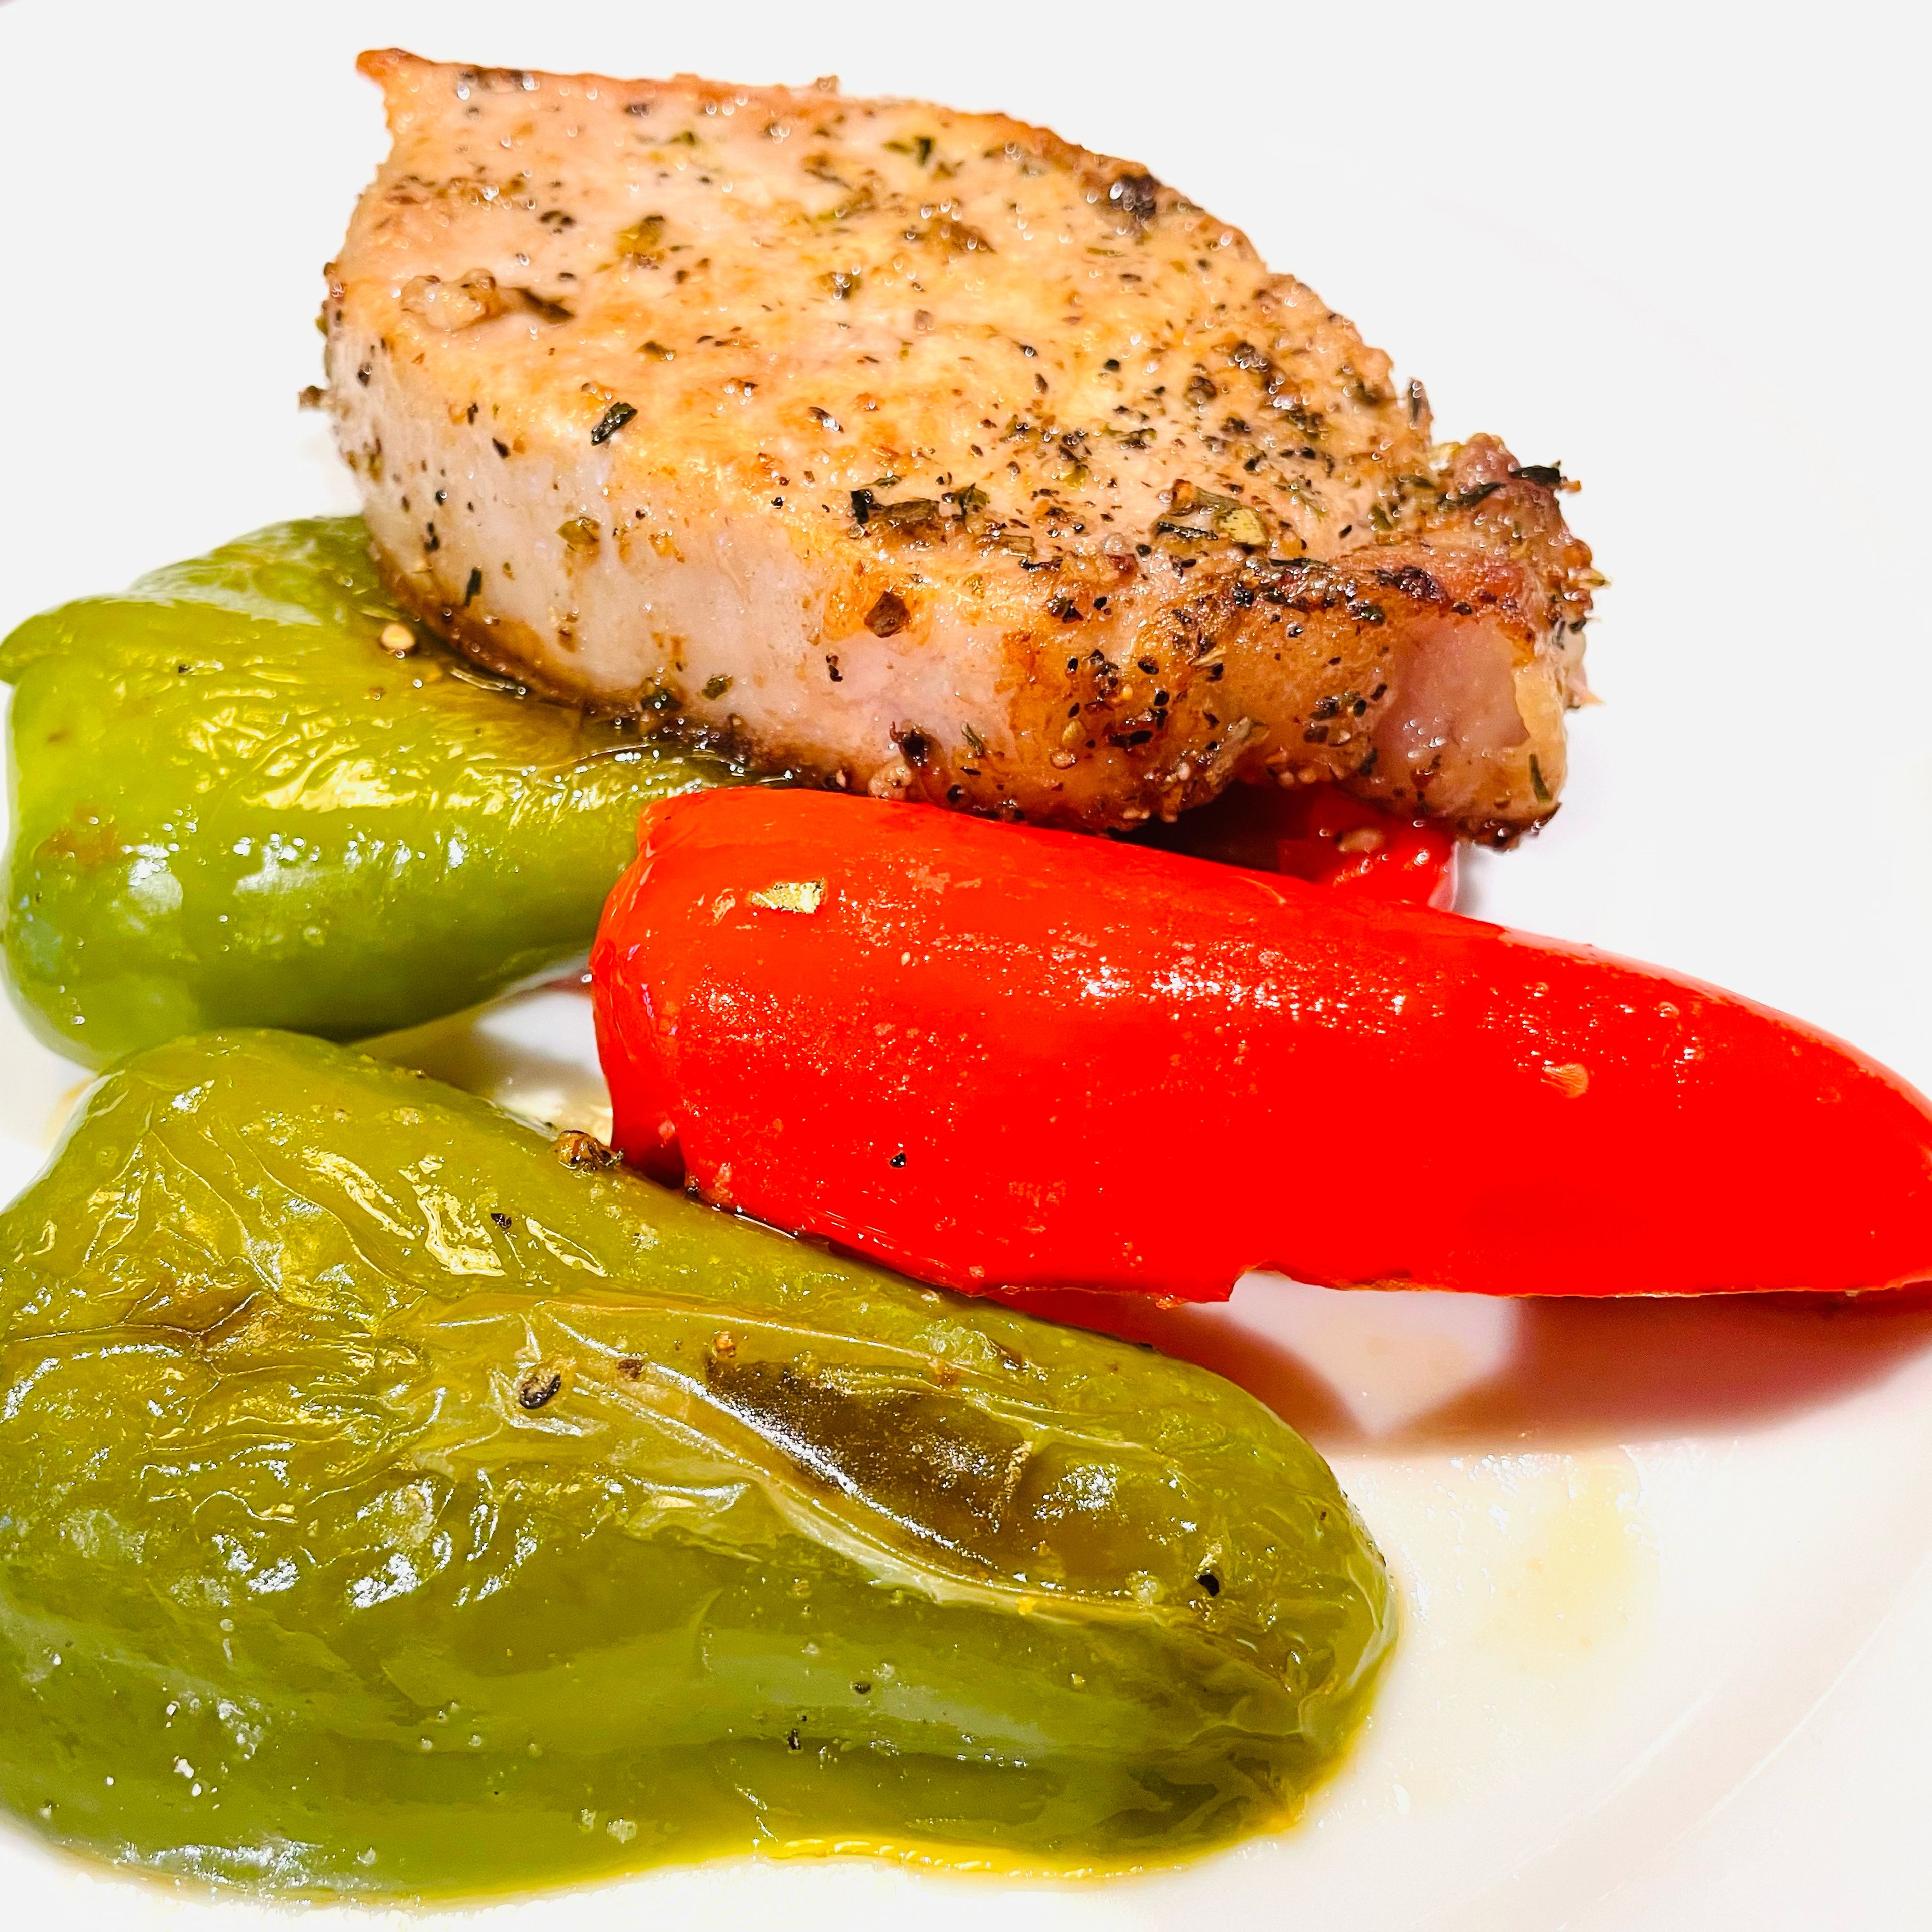 Roast pork loin with bell peppers